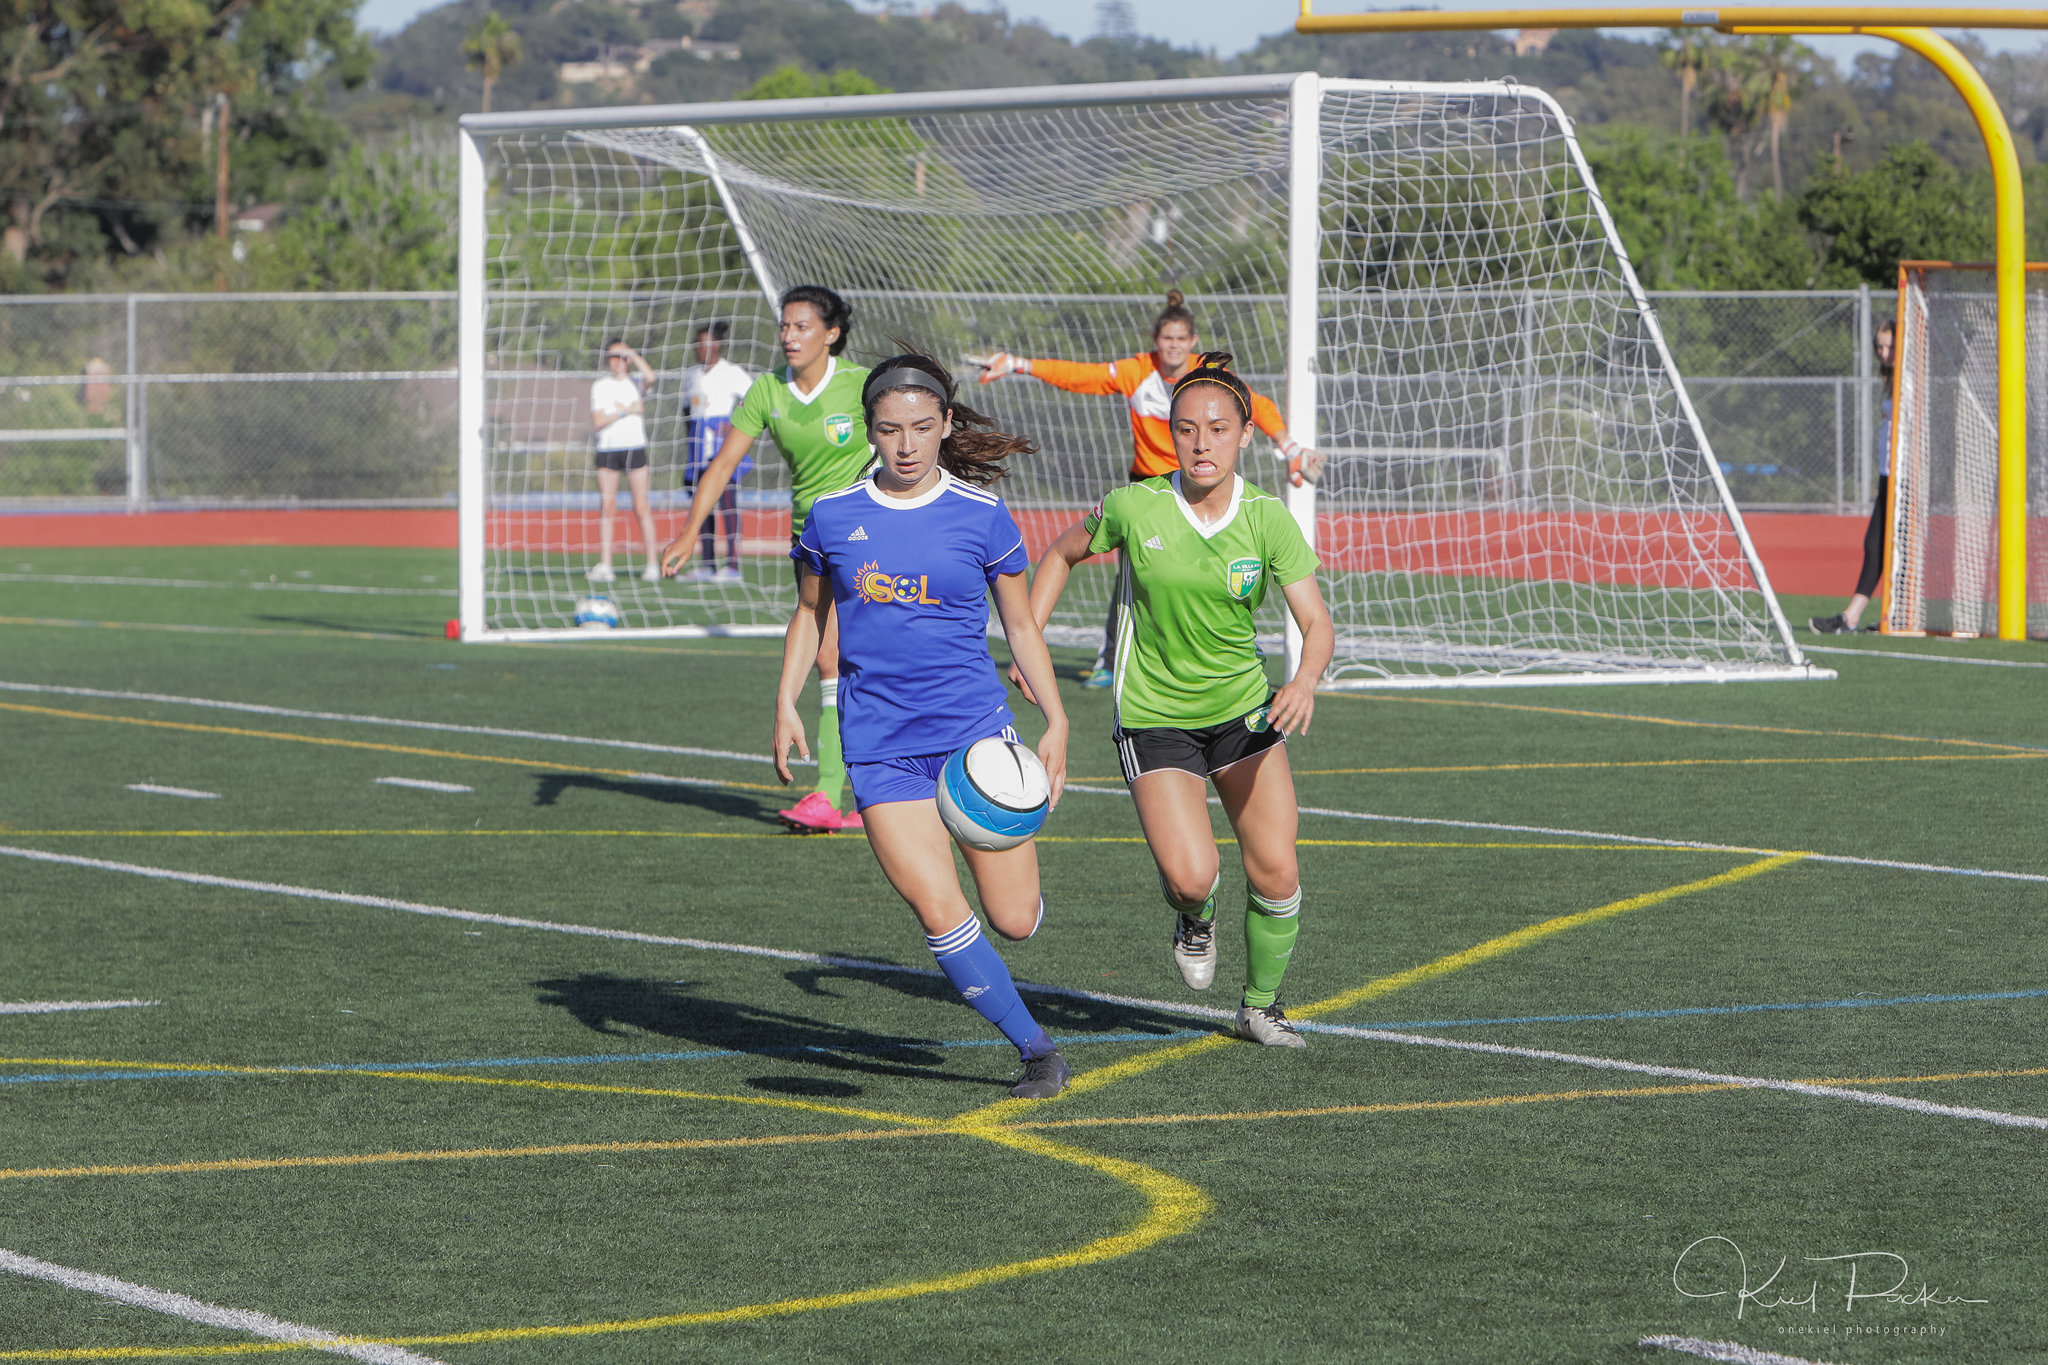 Cal South Women’s State Cup Wrap Up